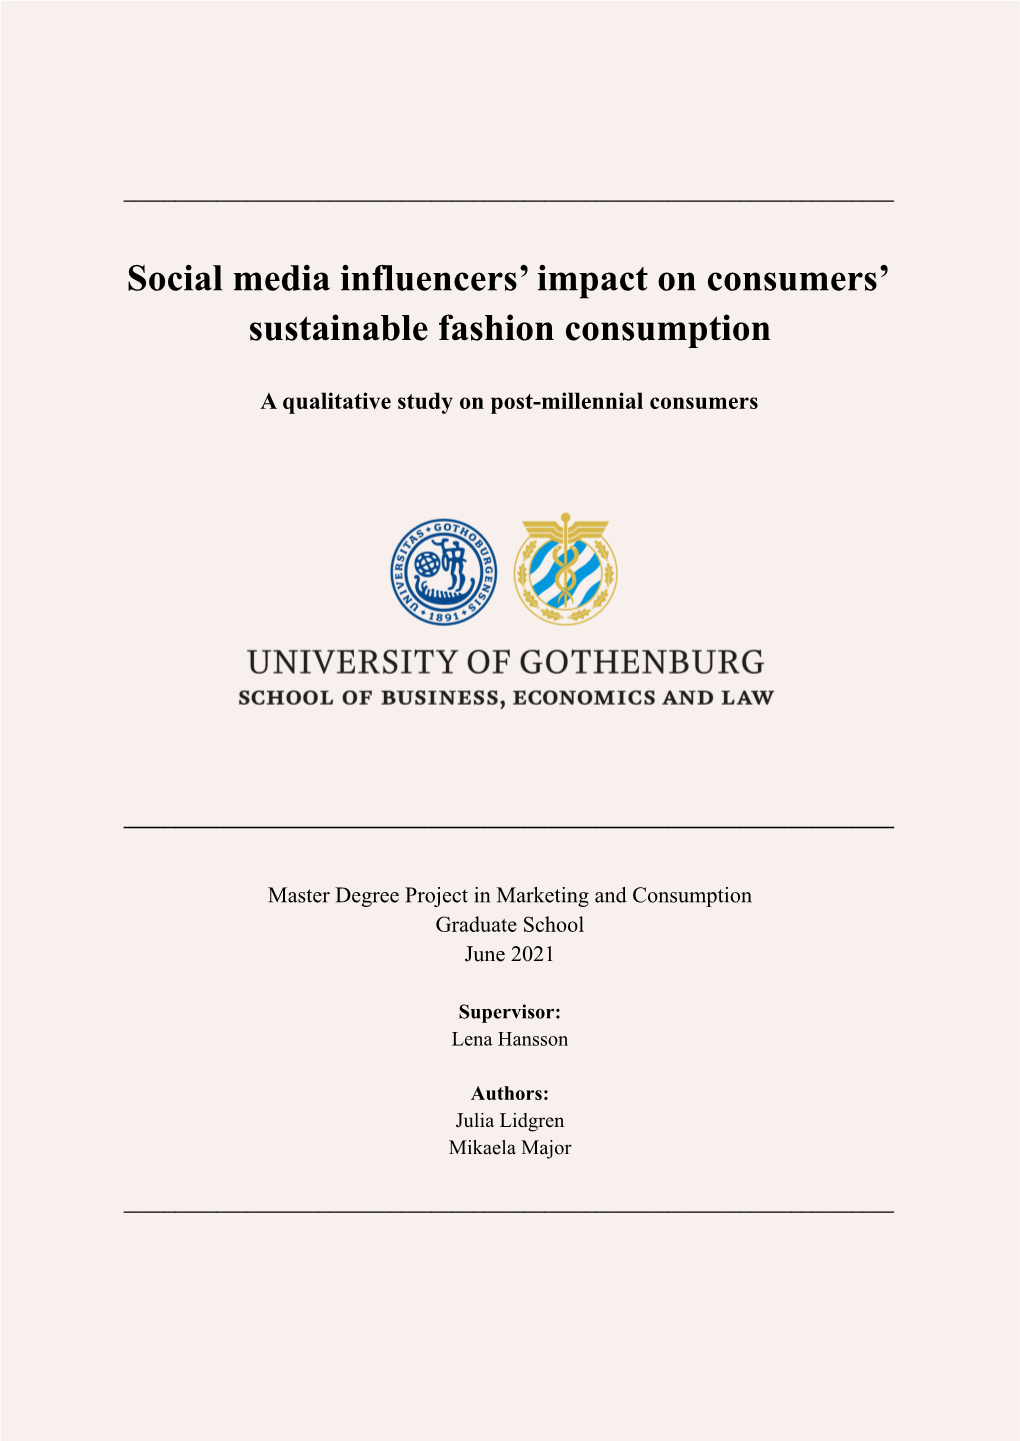 Social Media Influencers' Impact on Consumers' Sustainable Fashion